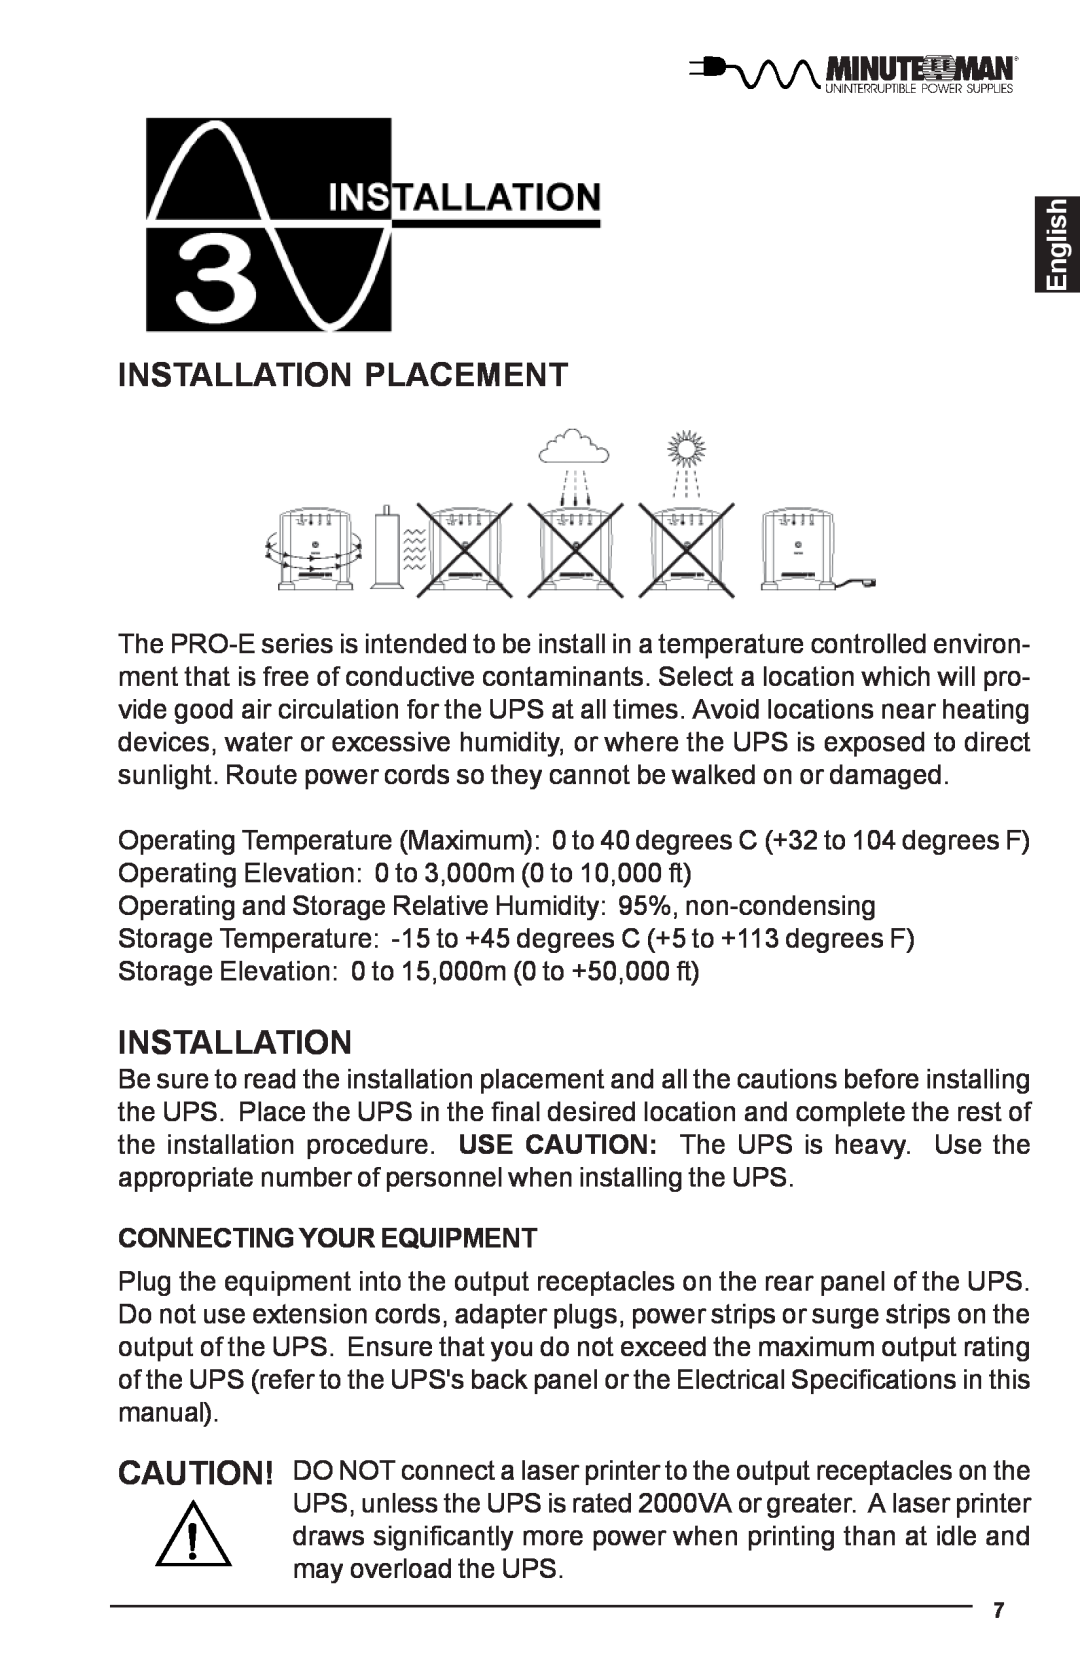 Minuteman UPS PRO-E user manual Installation Placement, English, Connecting Your Equipment 